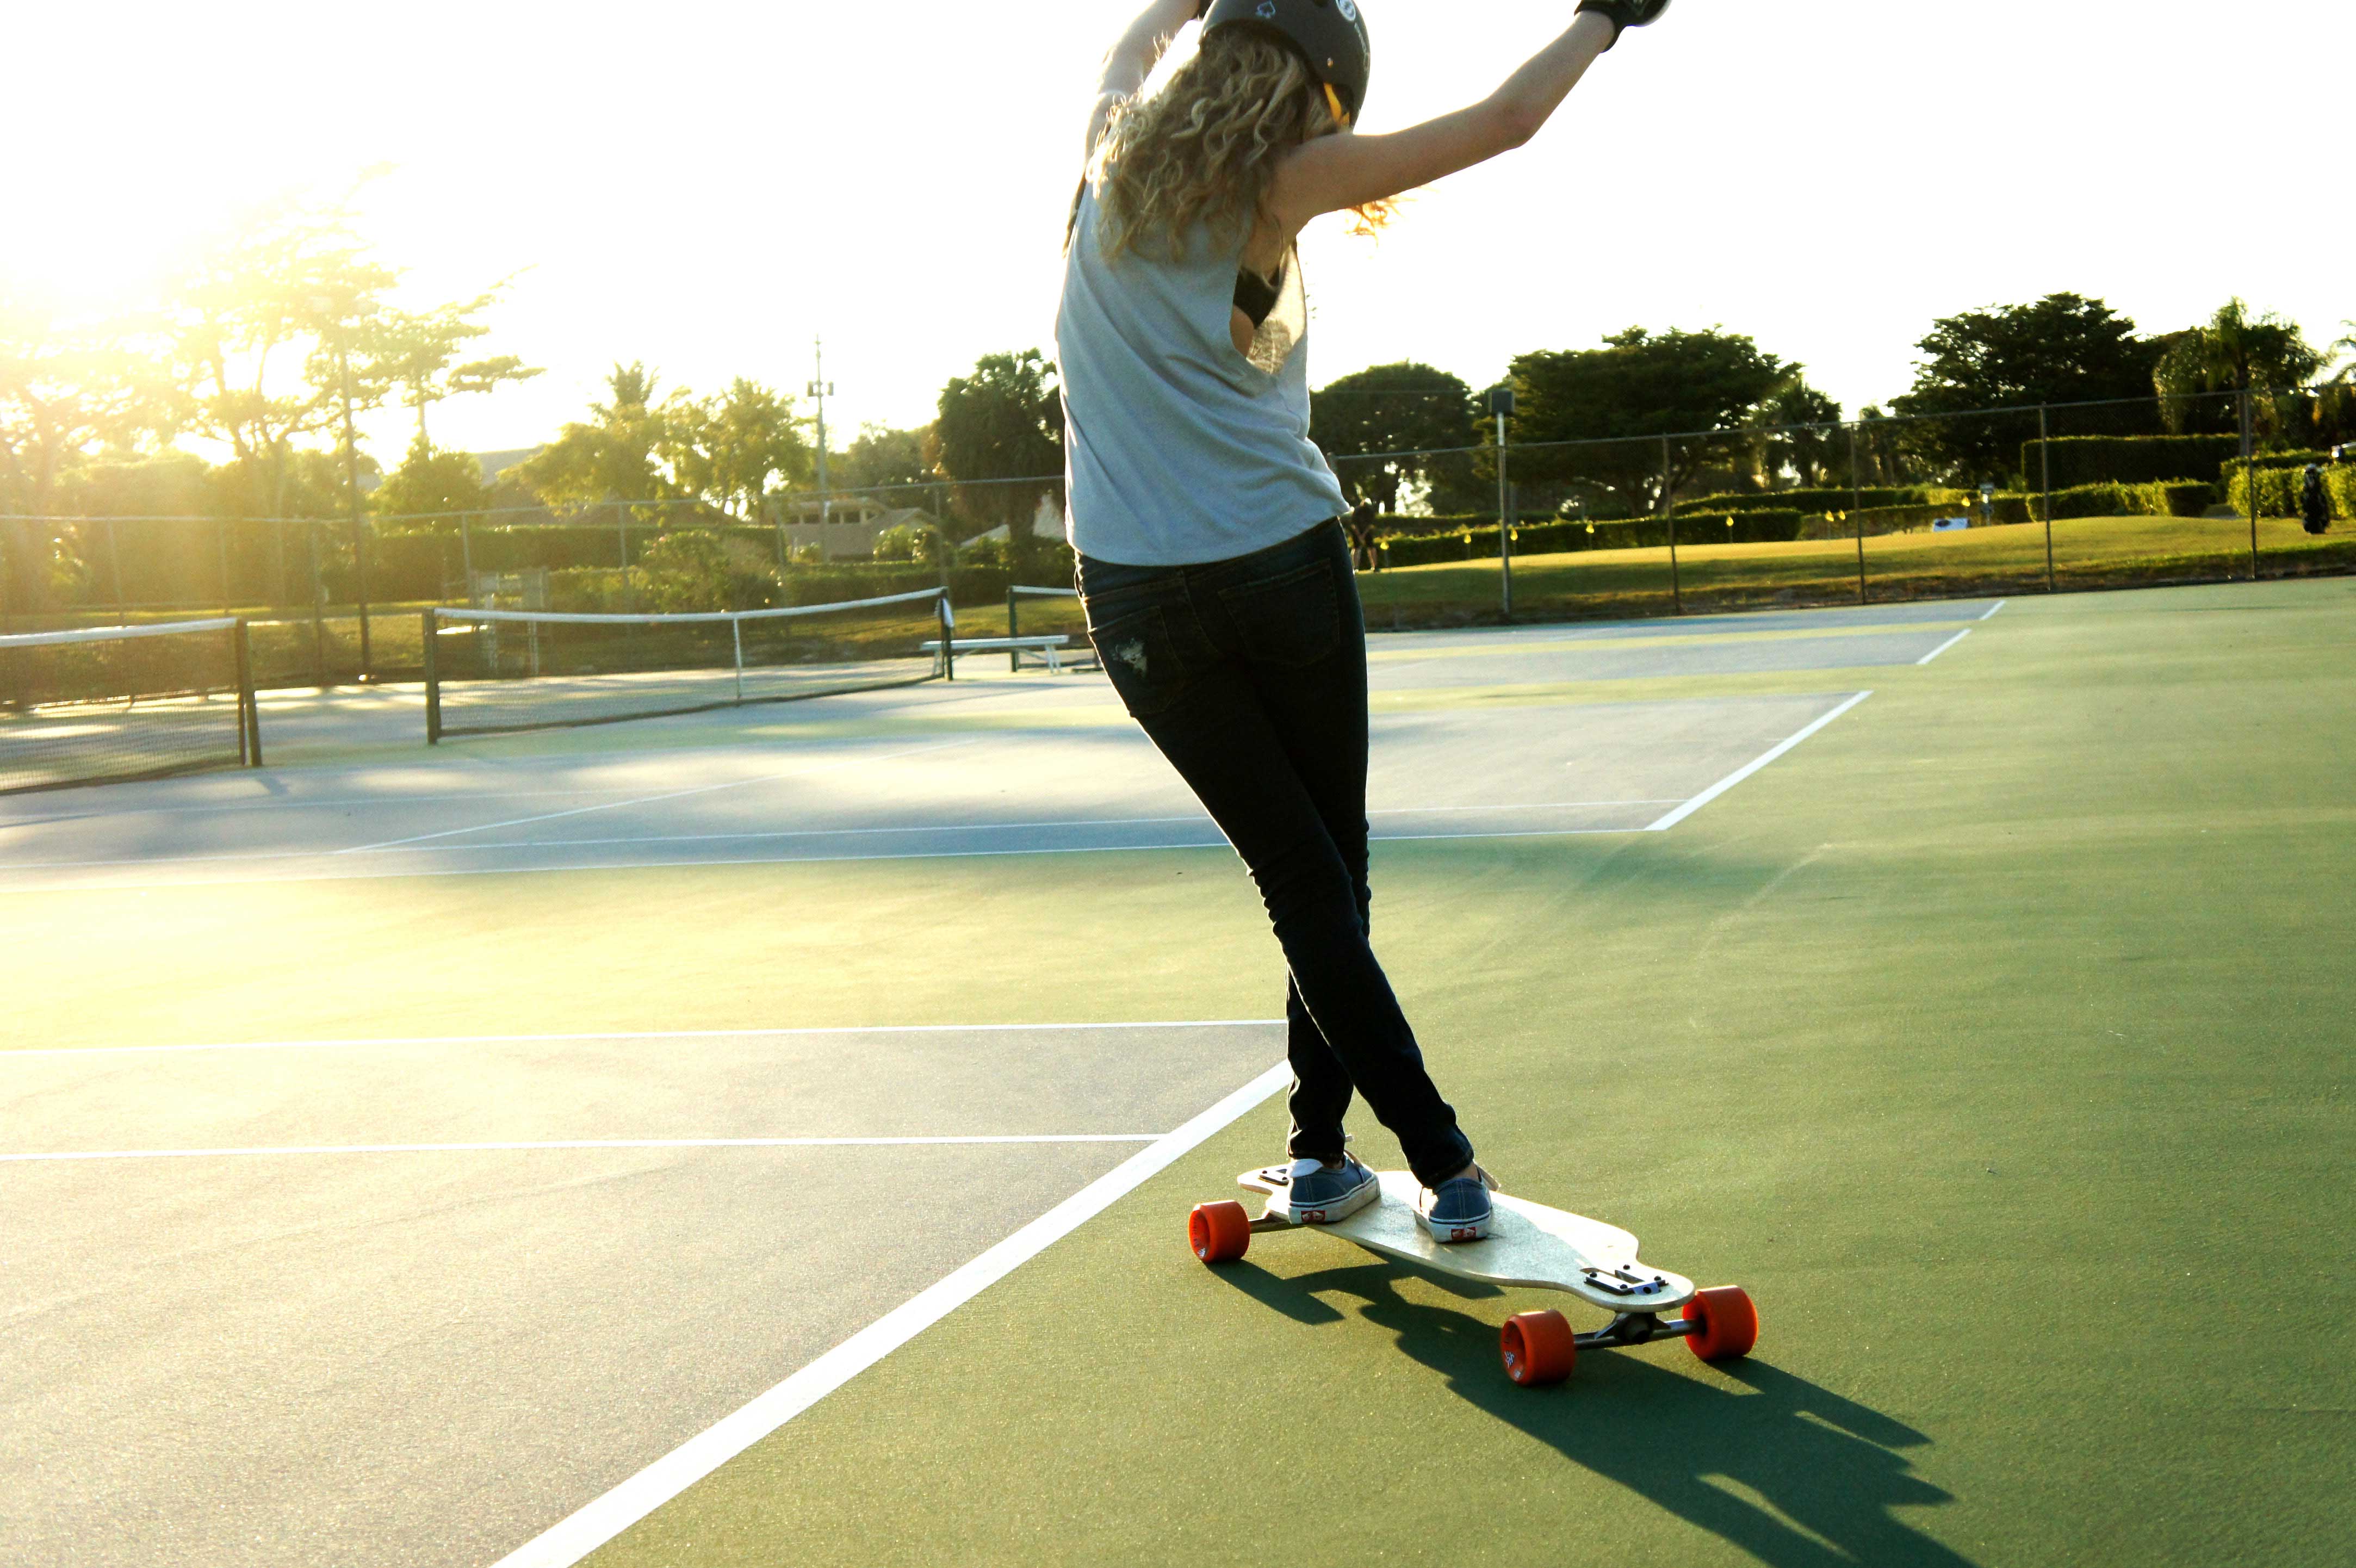 Dancing is a unique twist to riding a longboard and includes a variety